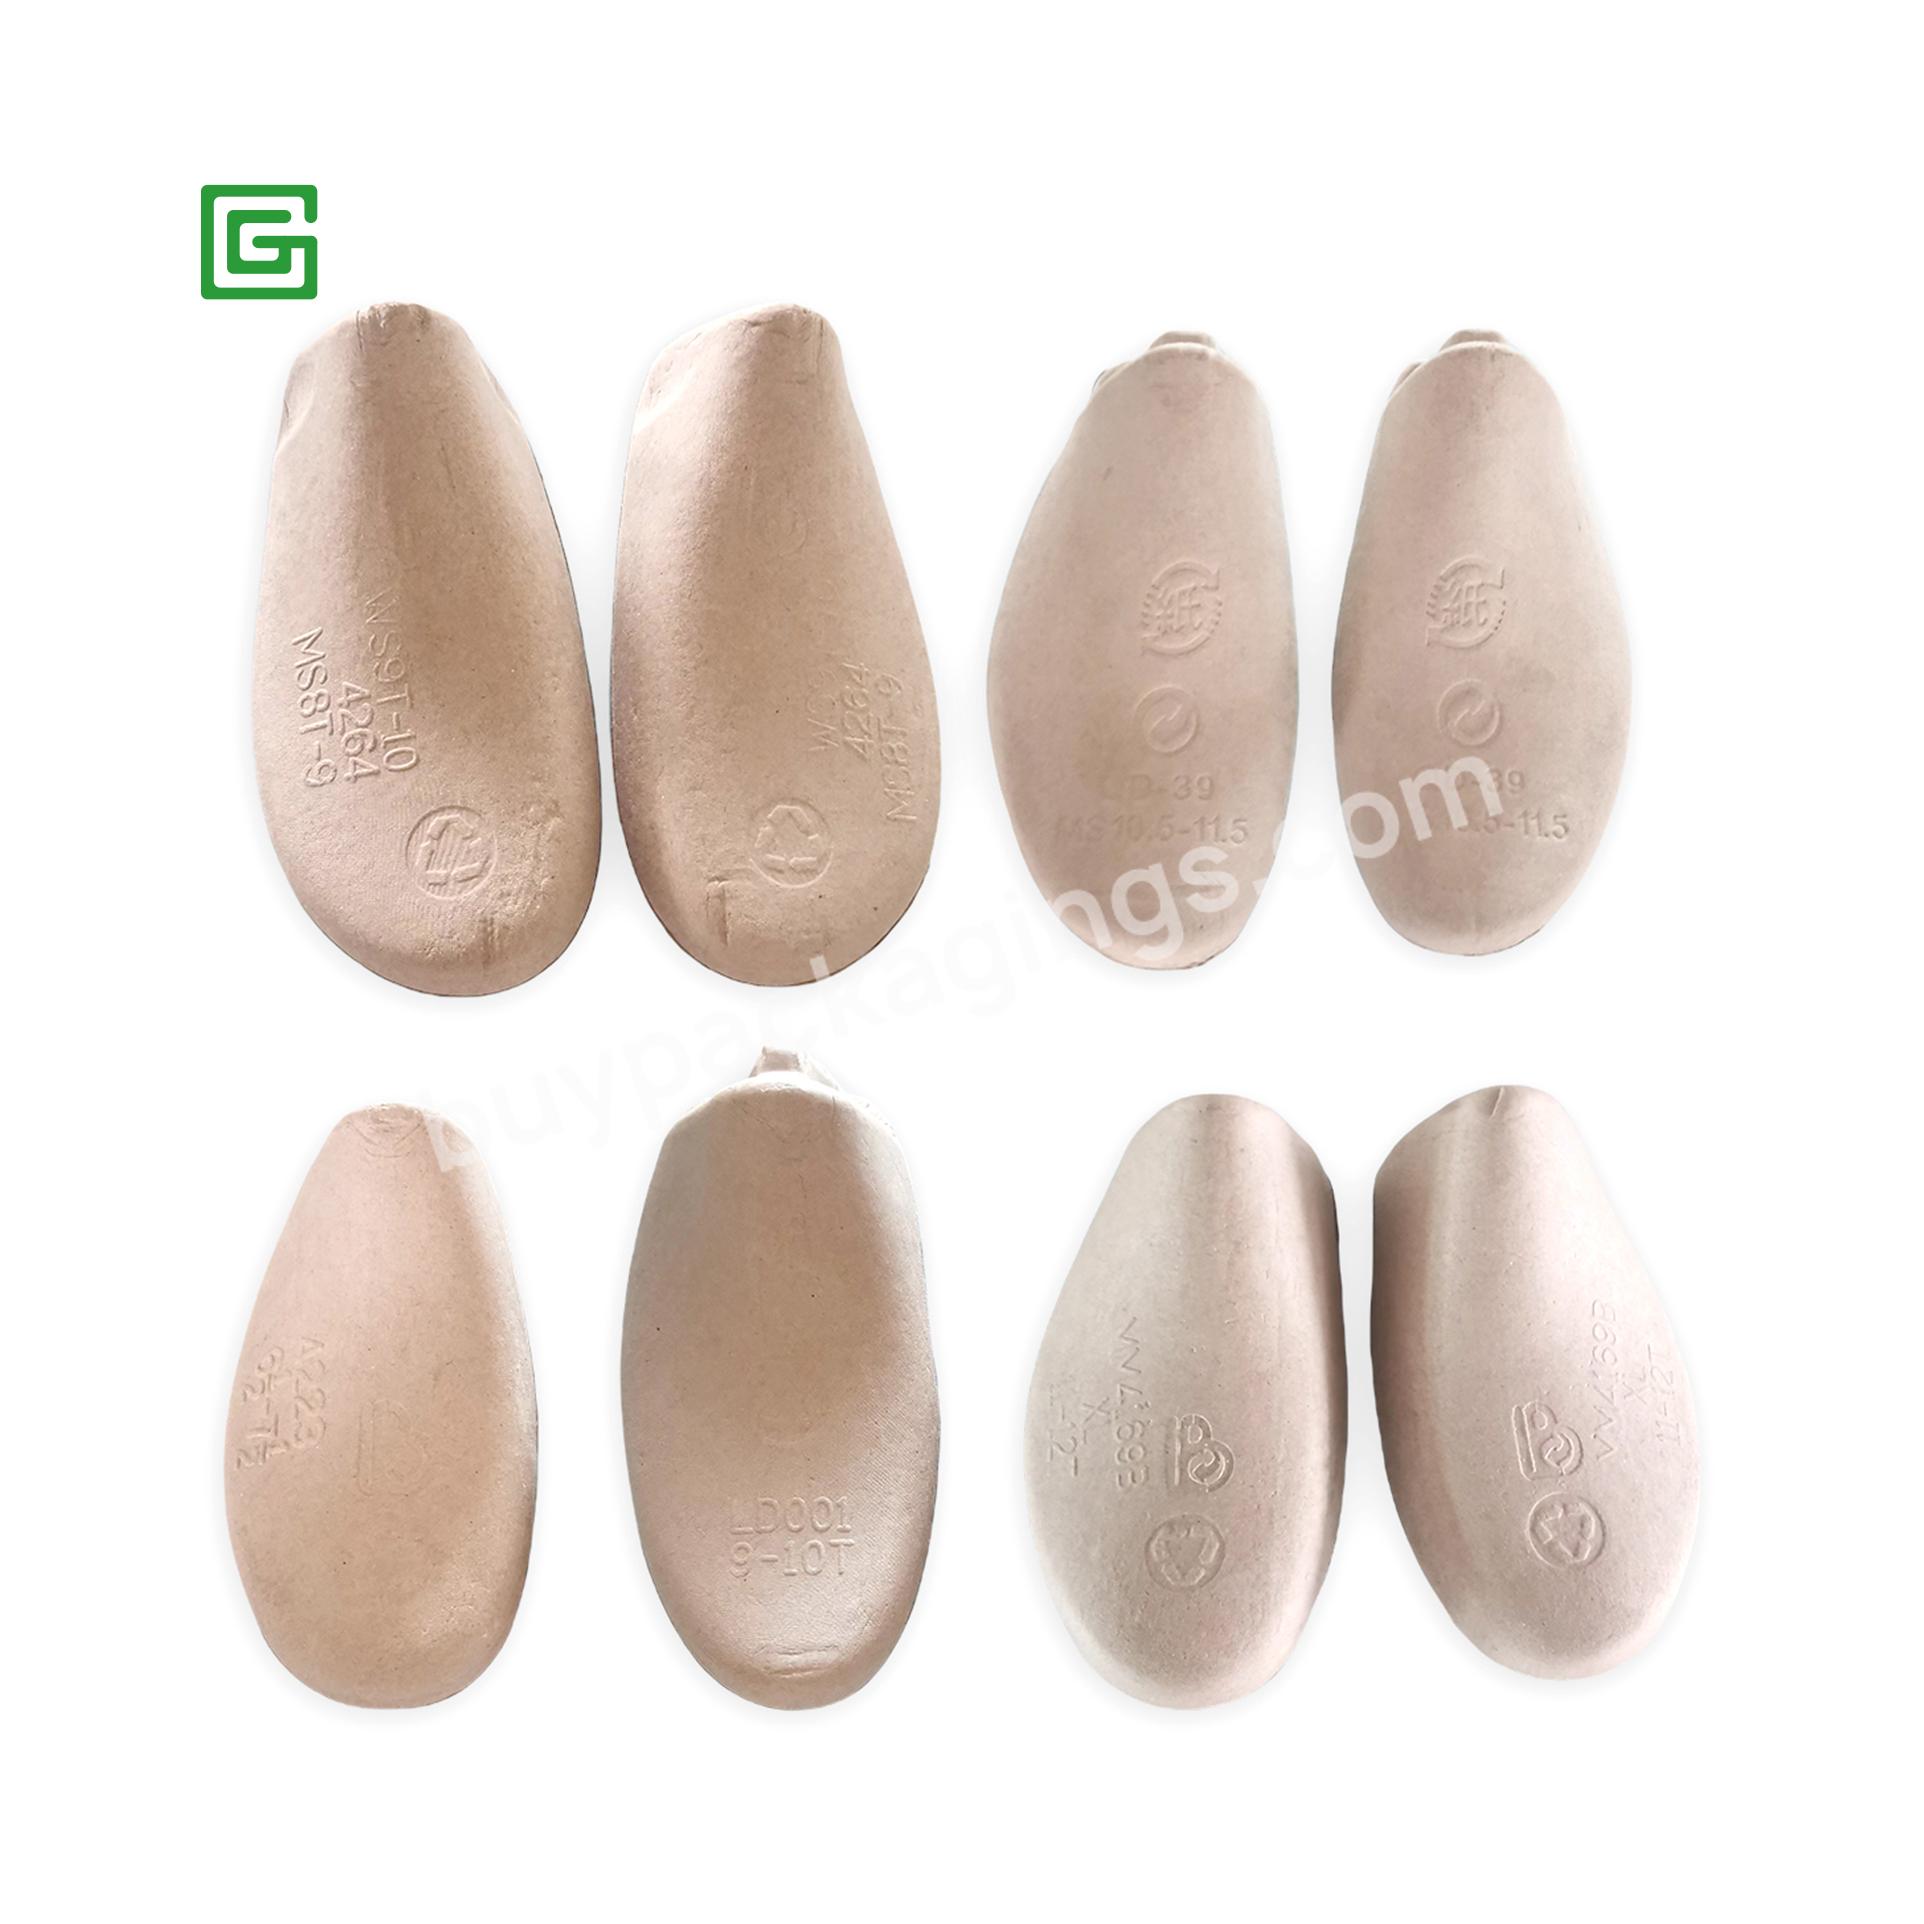 Biodegradable Custom Colors Shoe Trees Retail Molded Pulp Shoes Stretcher - Buy Molded Pulp Shoes Tree,Molded Pulp Shoes Stretcher,Custom Colors Shoe Trees.